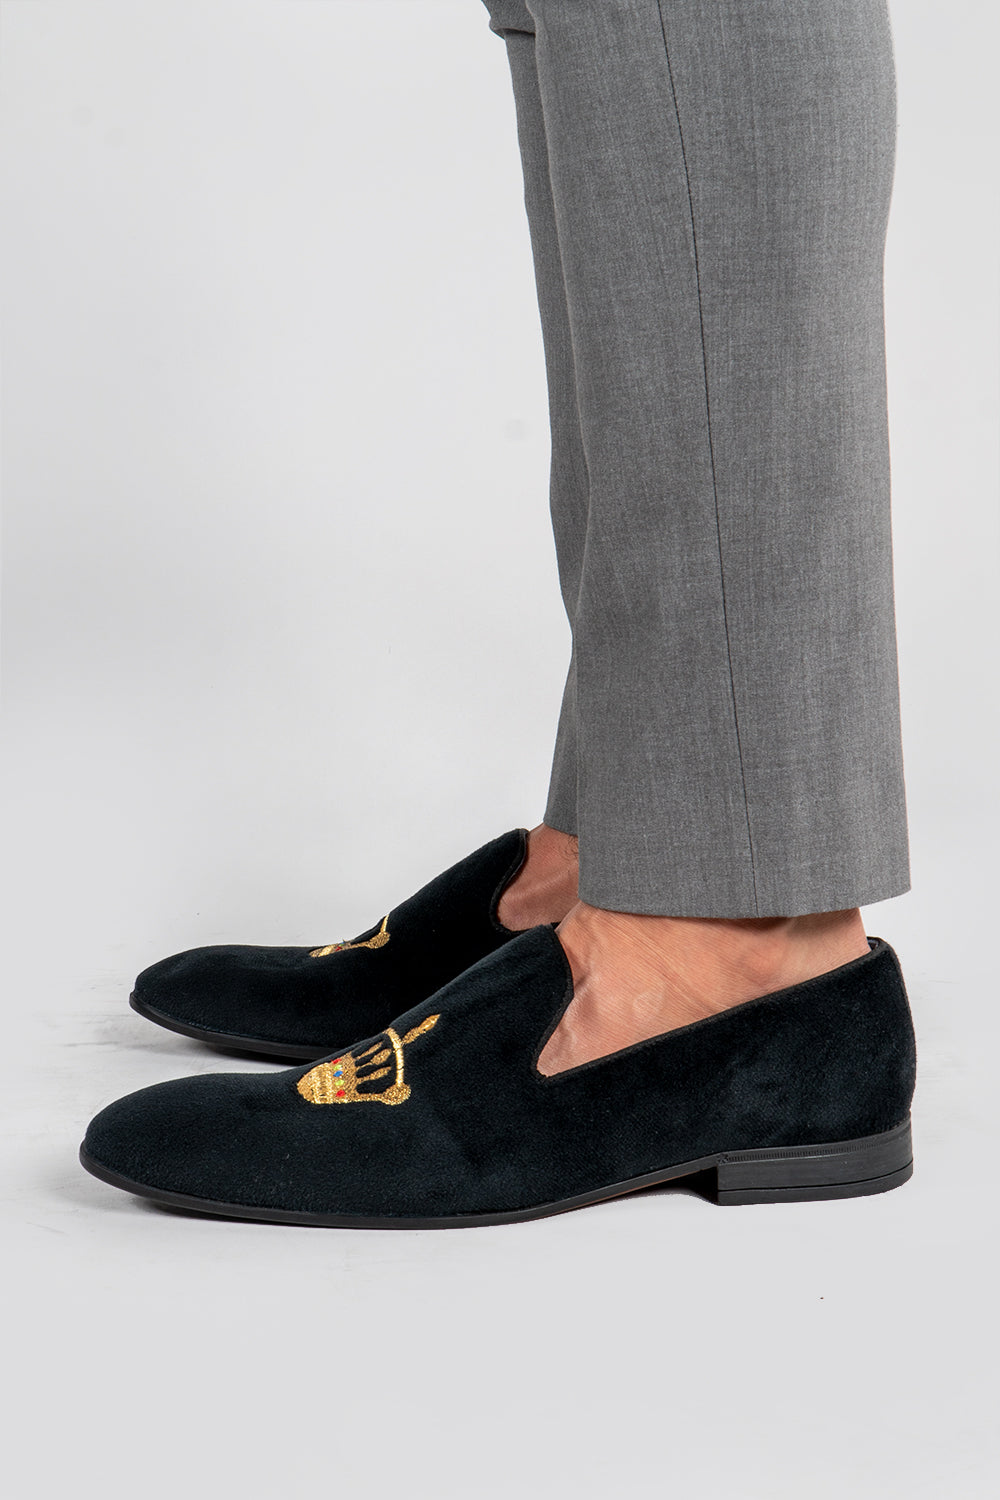 Men's black velvet loafers with crown embroidery 